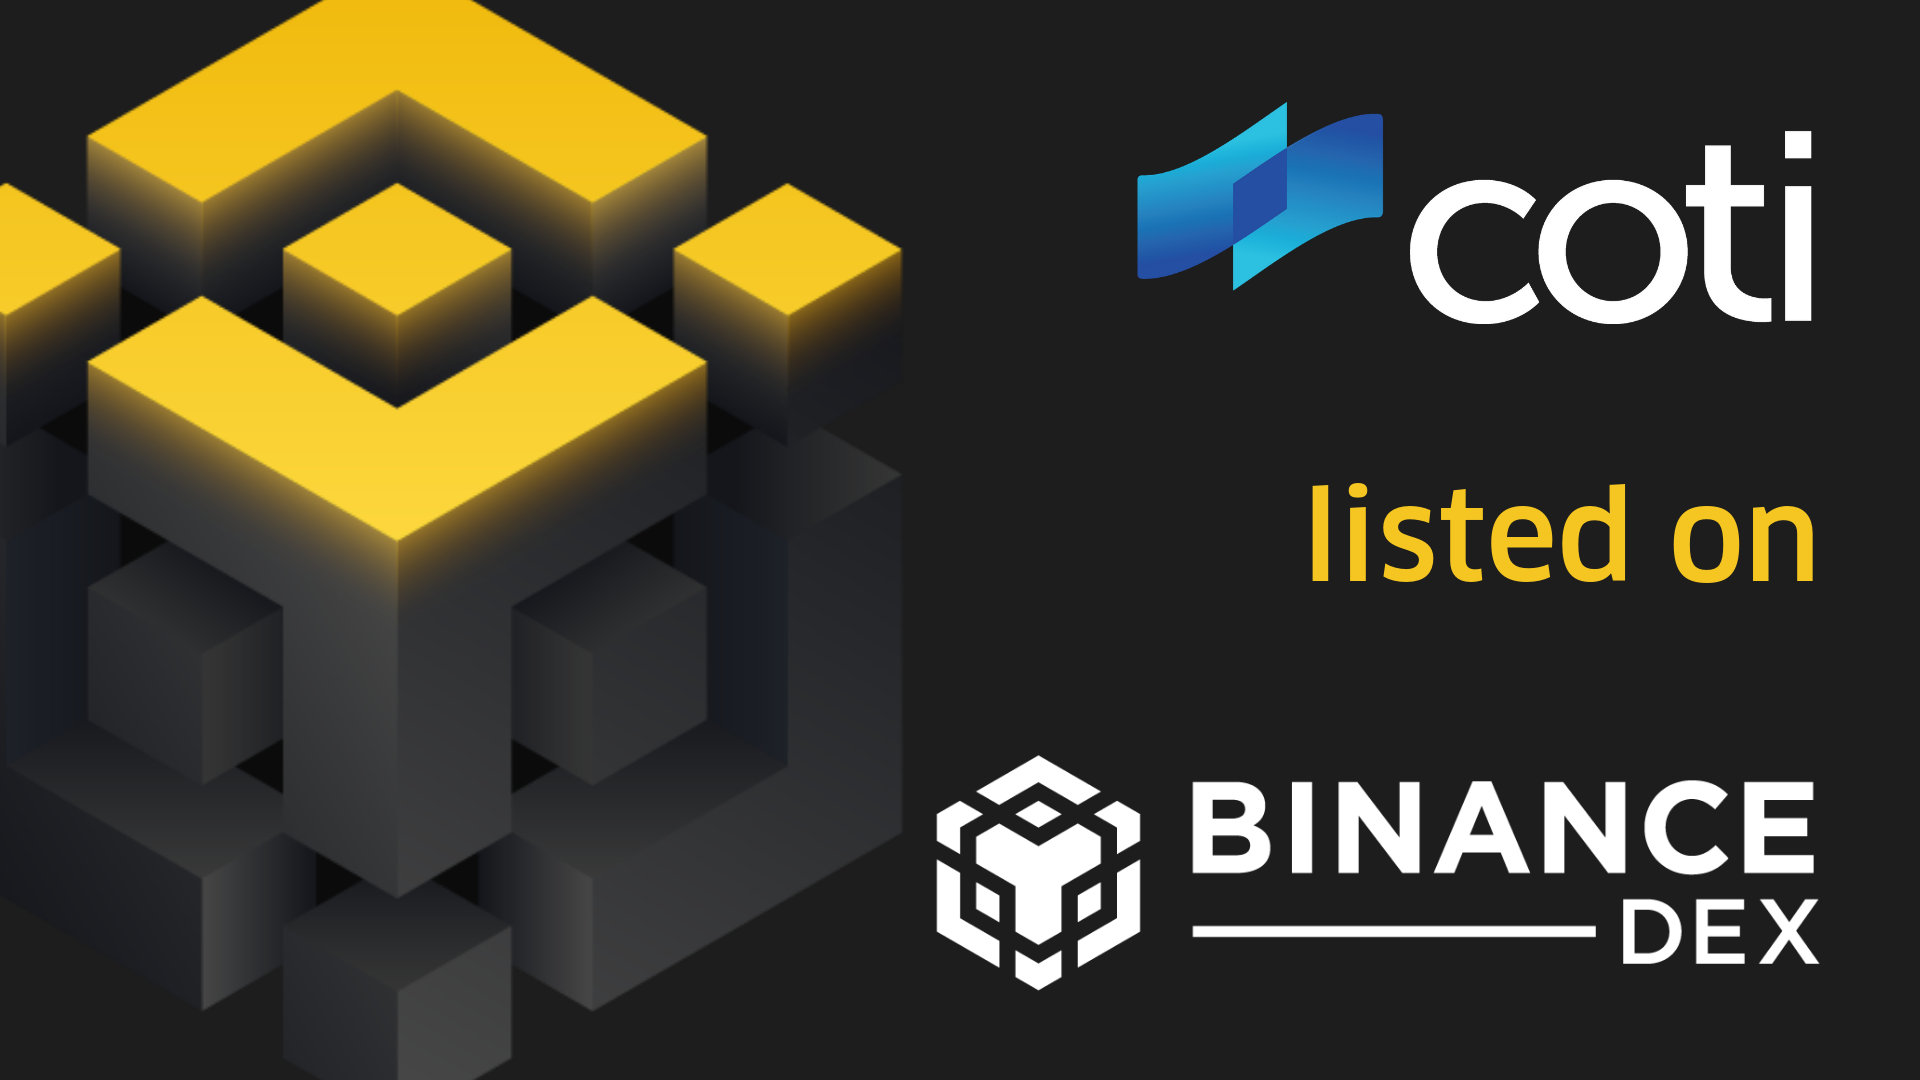 COTI has been listed on Binance DEX, making cross-chain ...